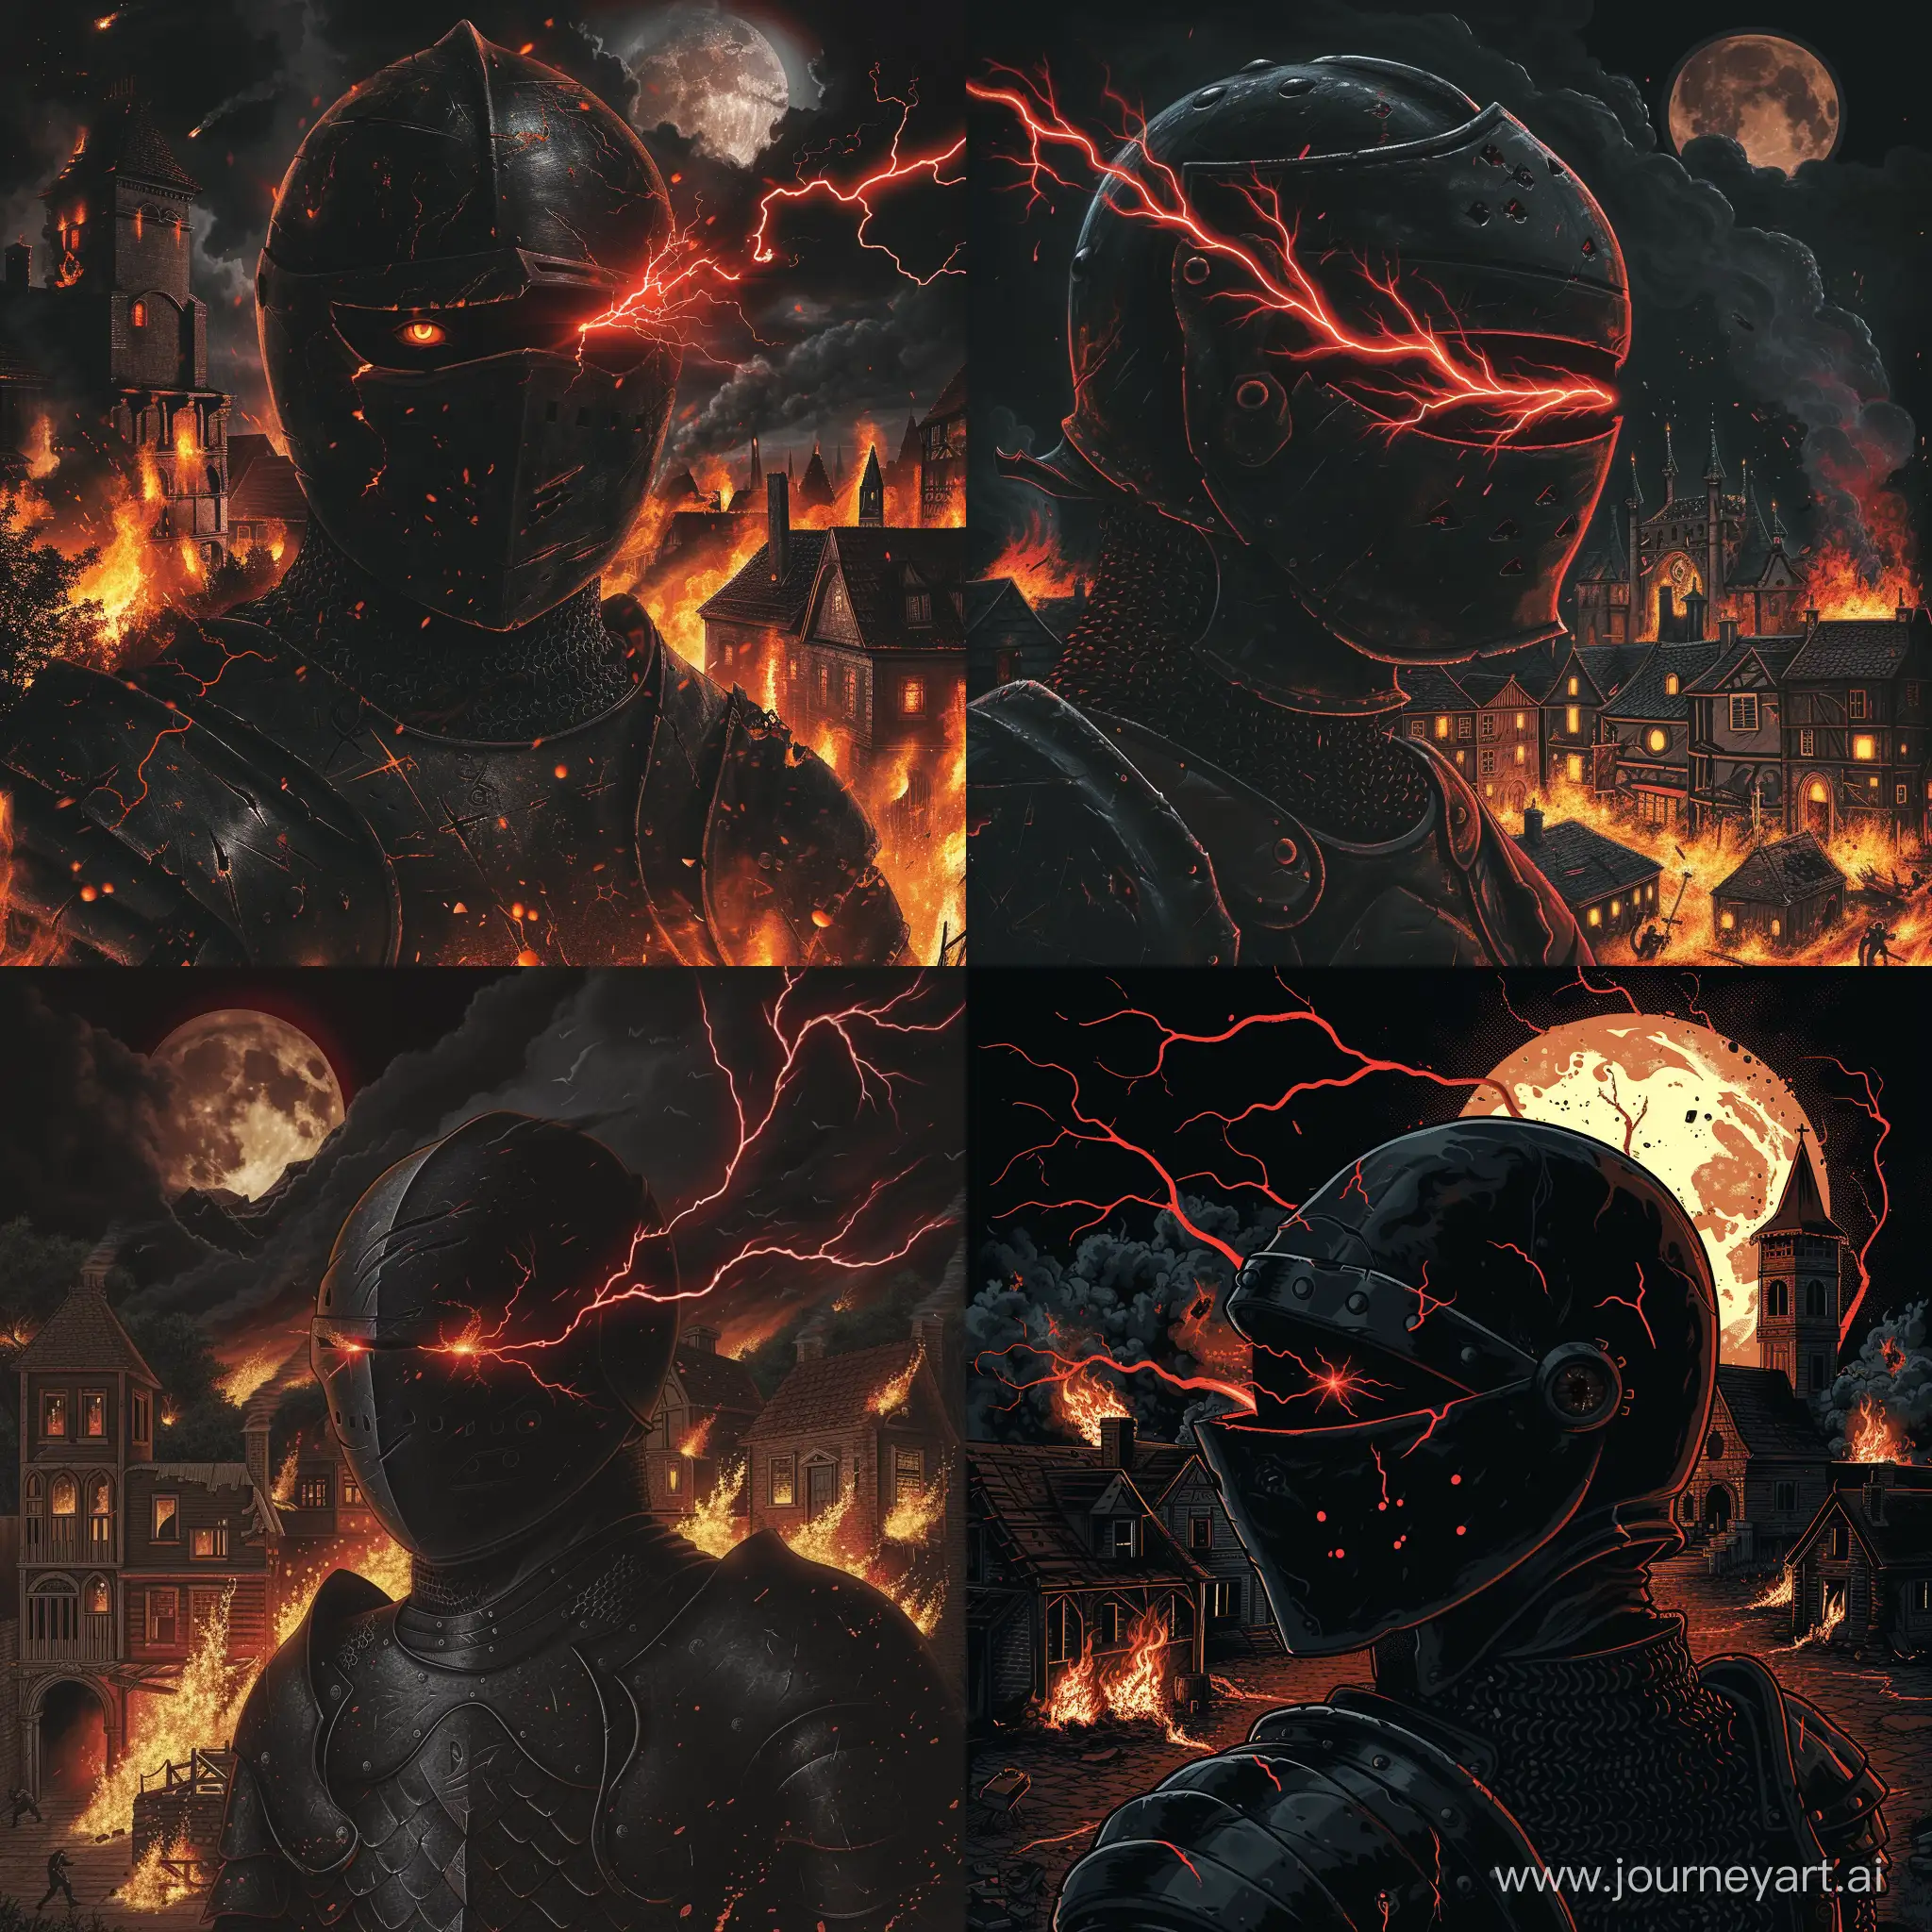 a black knight with brown-red glowing eyes, red lightning is beating from his eyes, a war fire is in the background, houses are burning, buildings in the medieval style, the sky is black with a blood moon